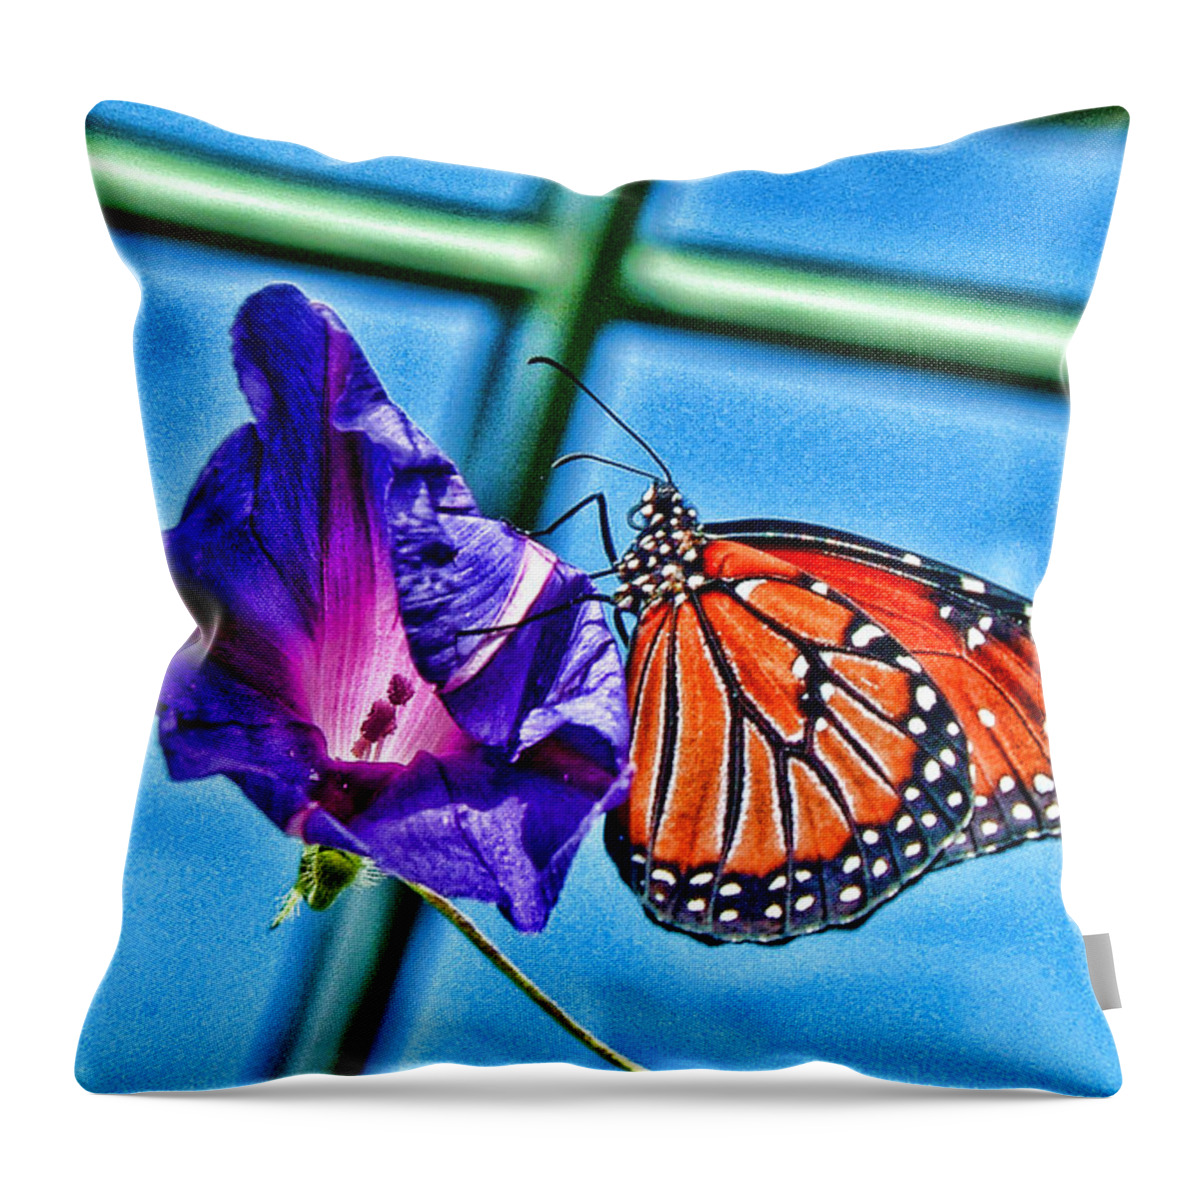 Mackinac Island Throw Pillow featuring the photograph Reigning Monarch by Mark Madere